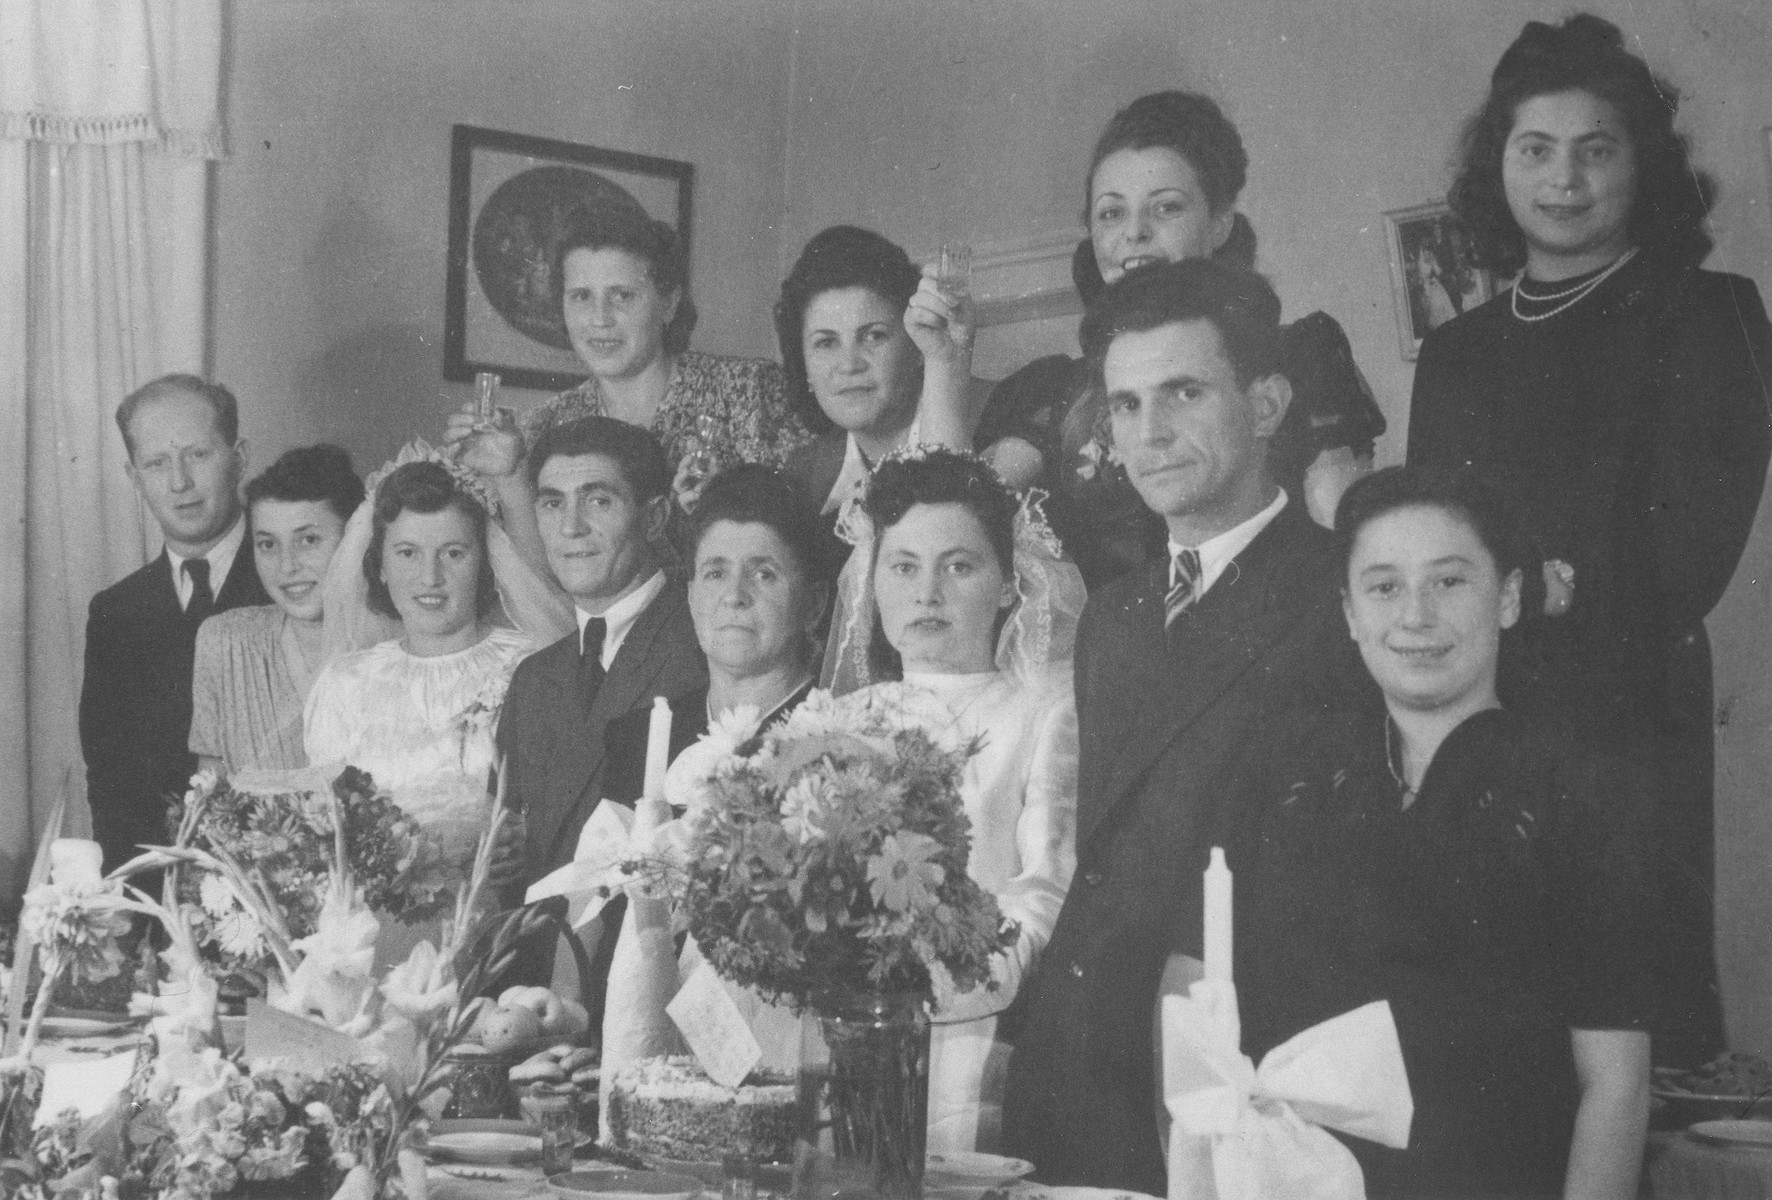 Family and friends celebrate the double wedding of Israel and Zlata (Distel) Malcmacher and Motel and Lola (Rolnik) Malcmacher.

Pictured from left to right are: (front row) Srulek and Natke (Rolnik) Katzman; Lola and Motel Malcmacher; Chaja Sara Malcmacher; Israel and Zlata Malcmacher; and Nechame (Probe) Rothschild; (back row): Chele (Huberman) Malcmacher; Rushke (Malcmacher) Borenstein; Sabina (Warshawsky) Rosenzweig; and Hadassah (Abramovich) Wandersman.